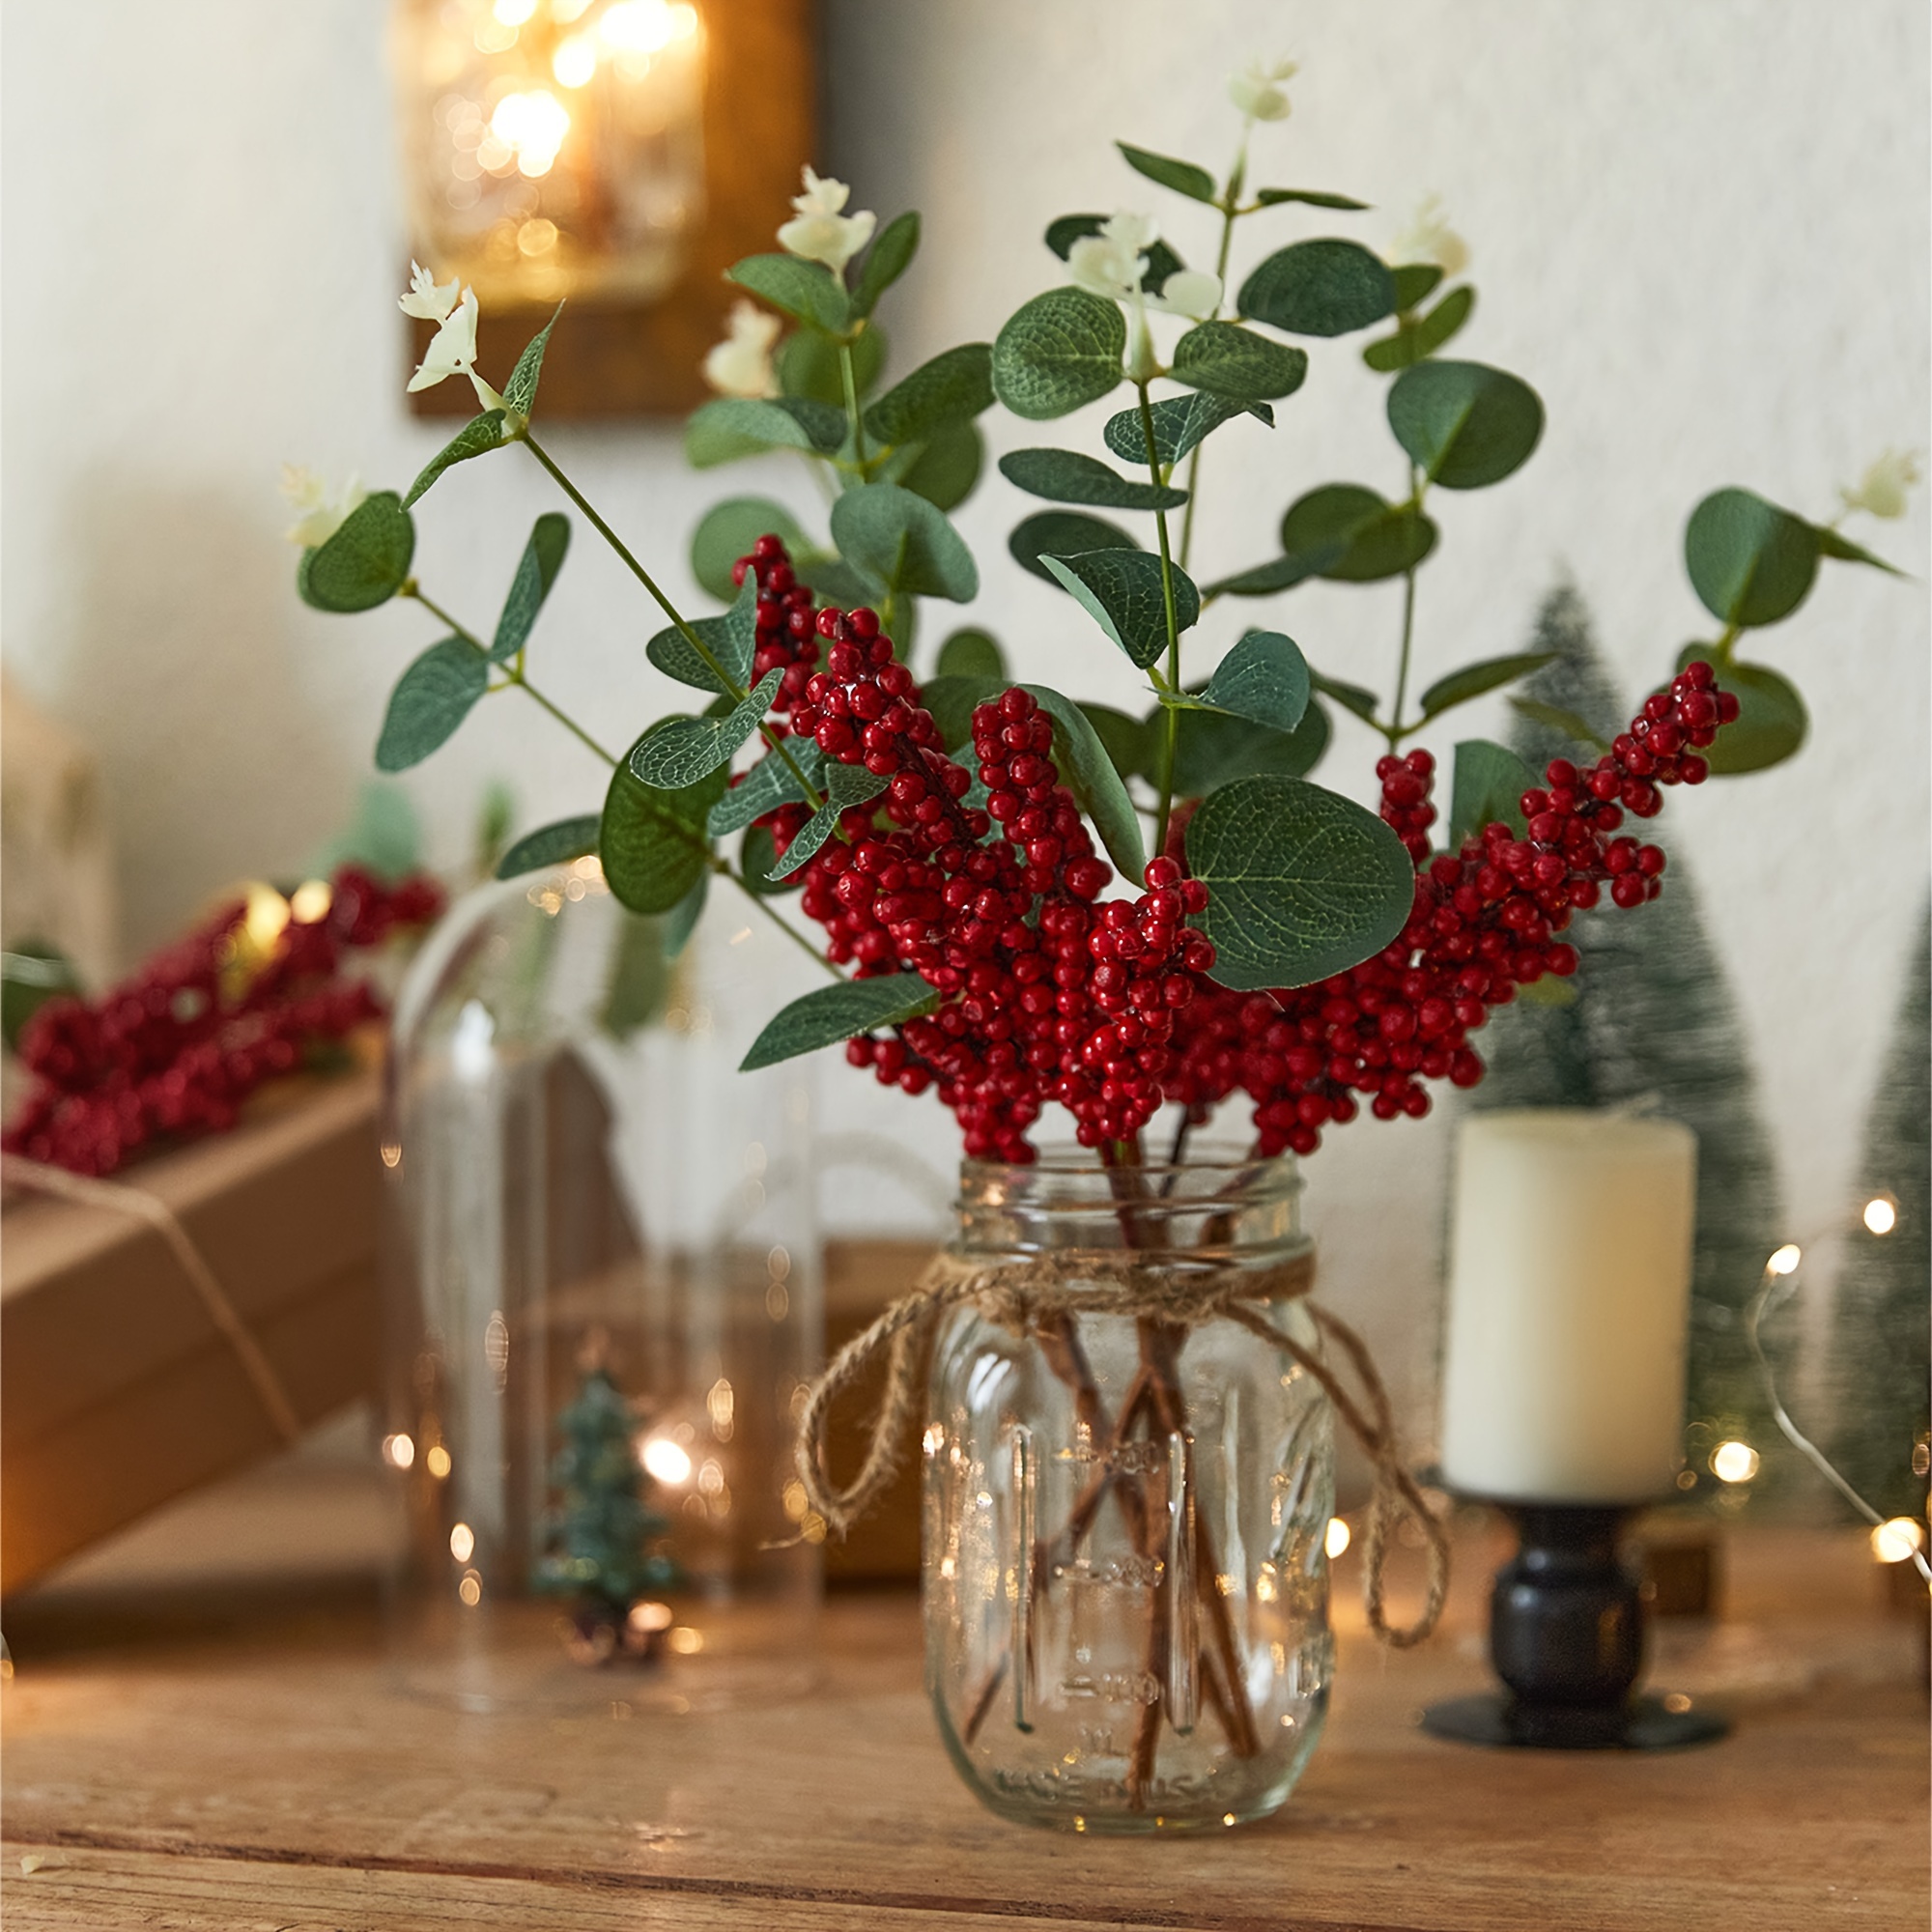 YHDSN Artificial Eucalyptus Stems with Red Berries - 13.78 Faux Greenery  for Christmas Winter Crafts Holiday Home Decor and Floral Arrangements 